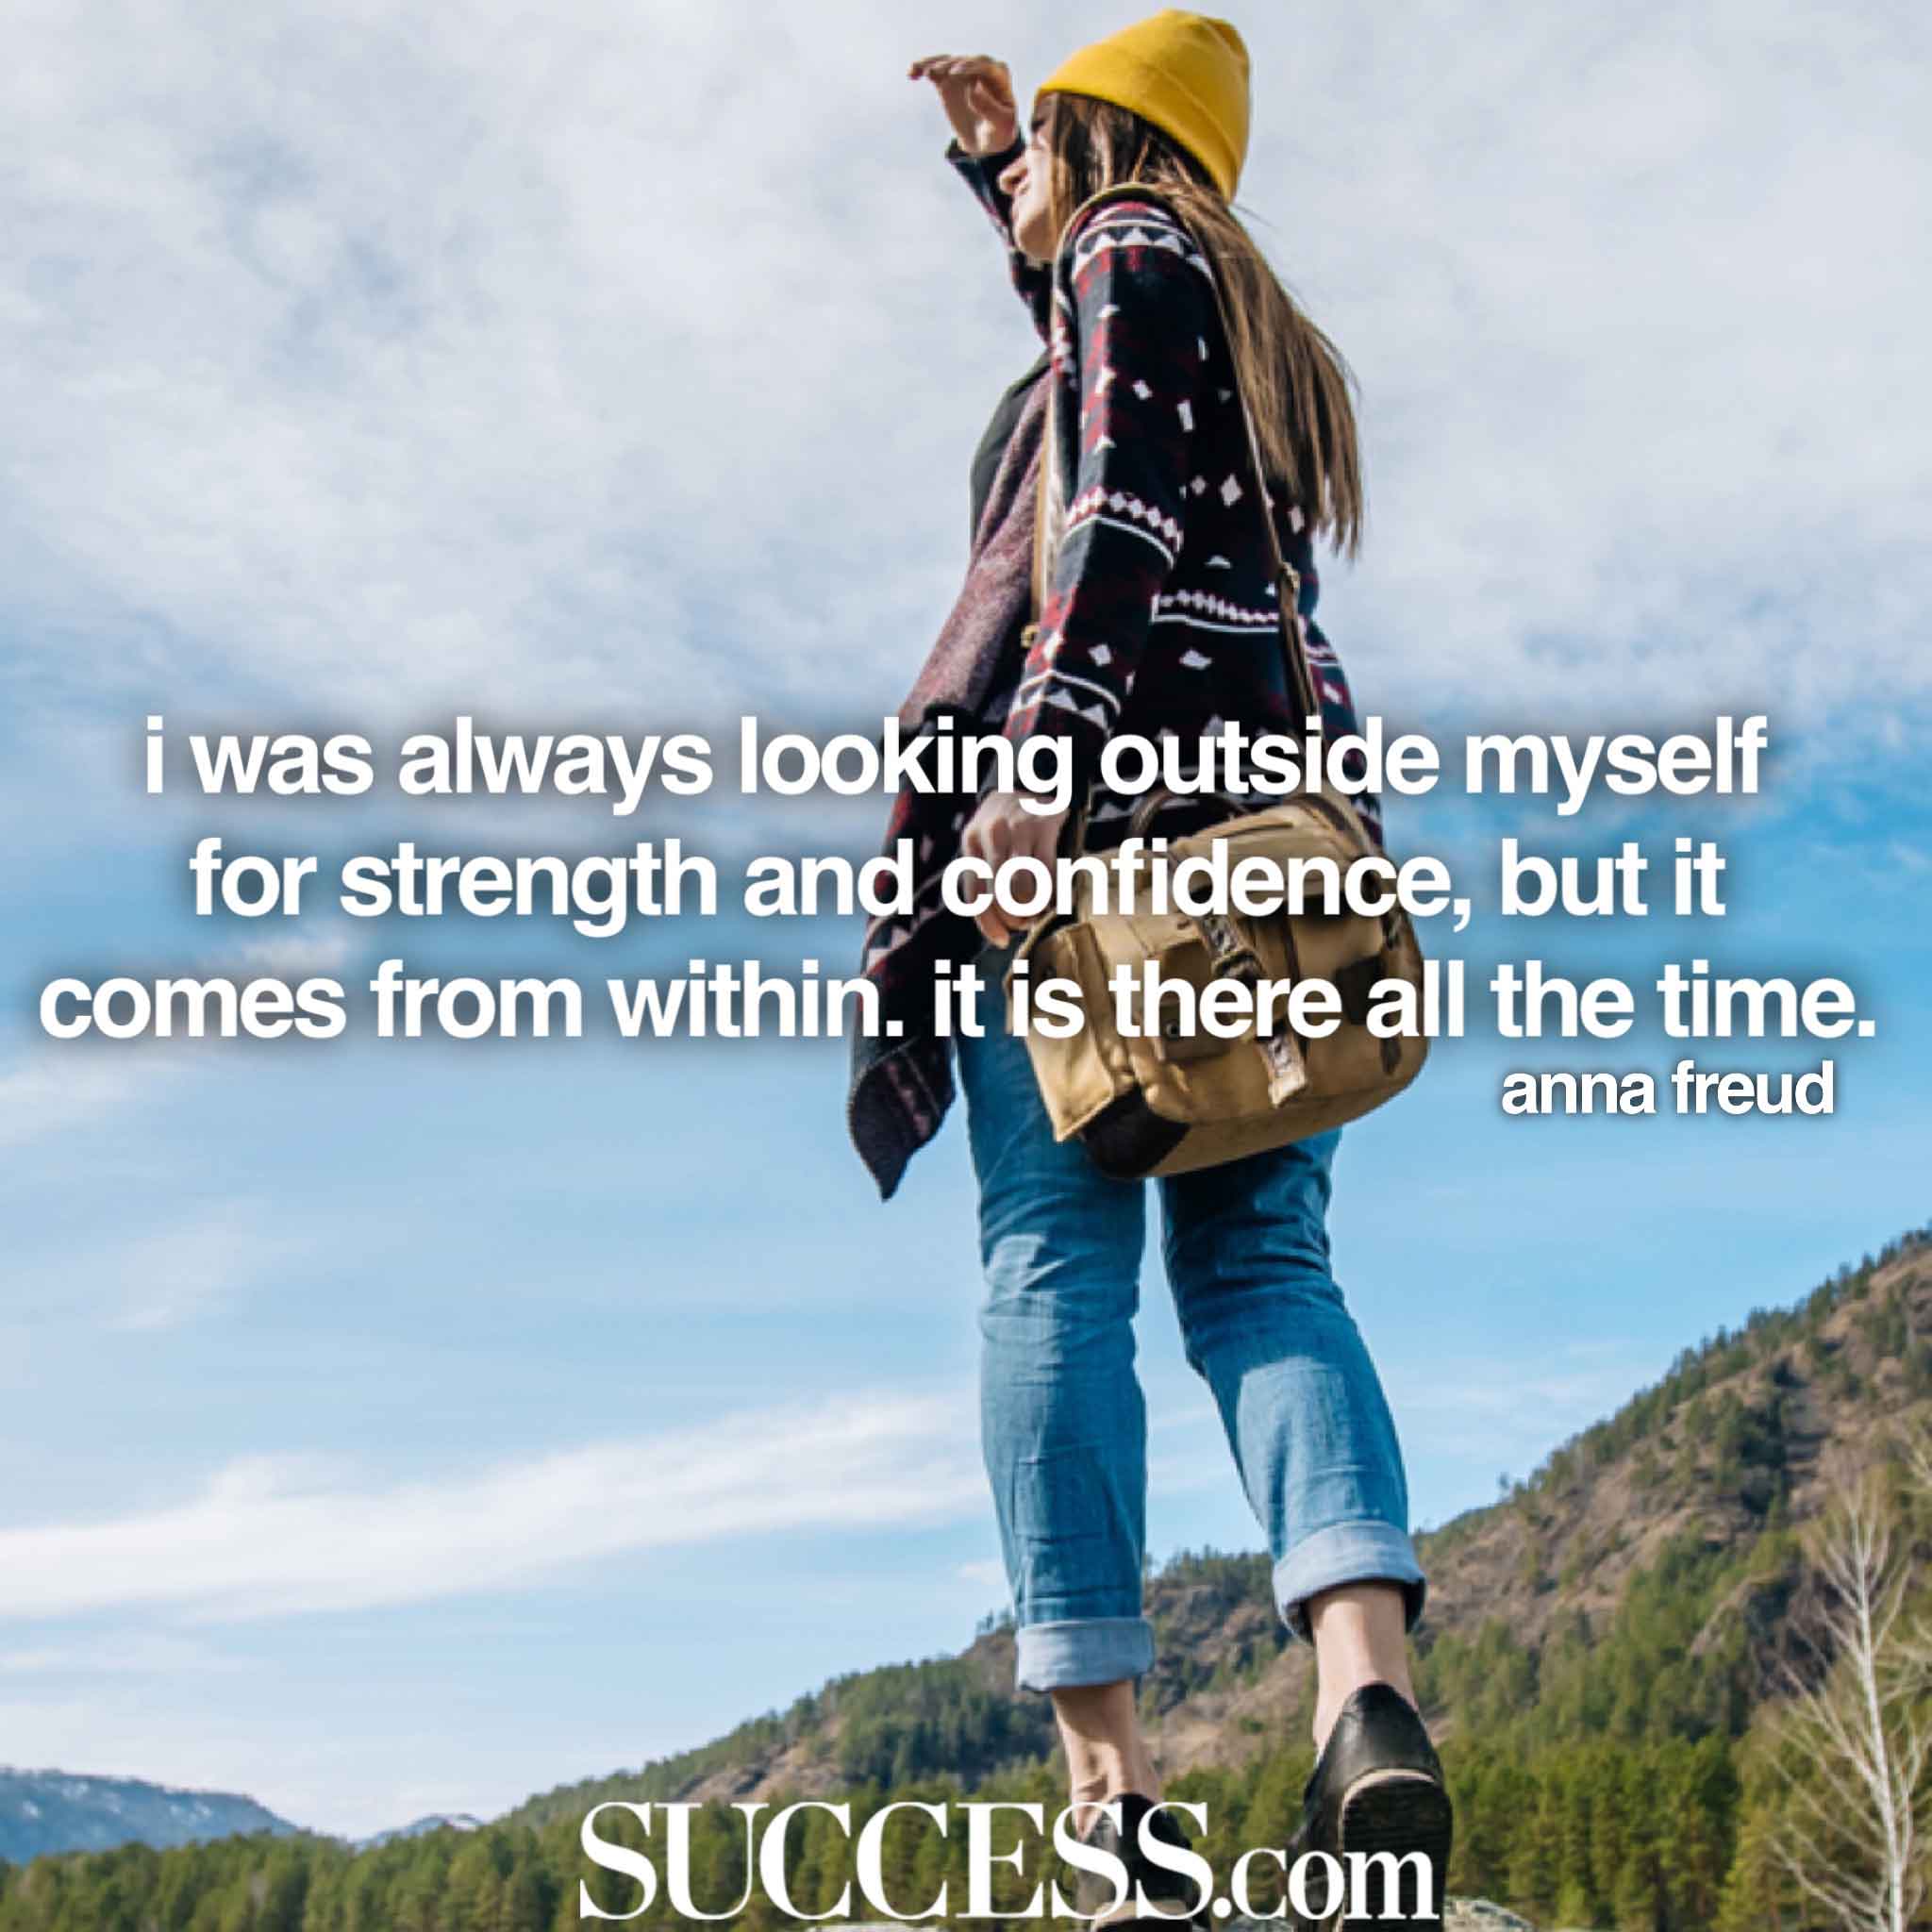 13 Powerful Quotes About Inner Strength | SUCCESS